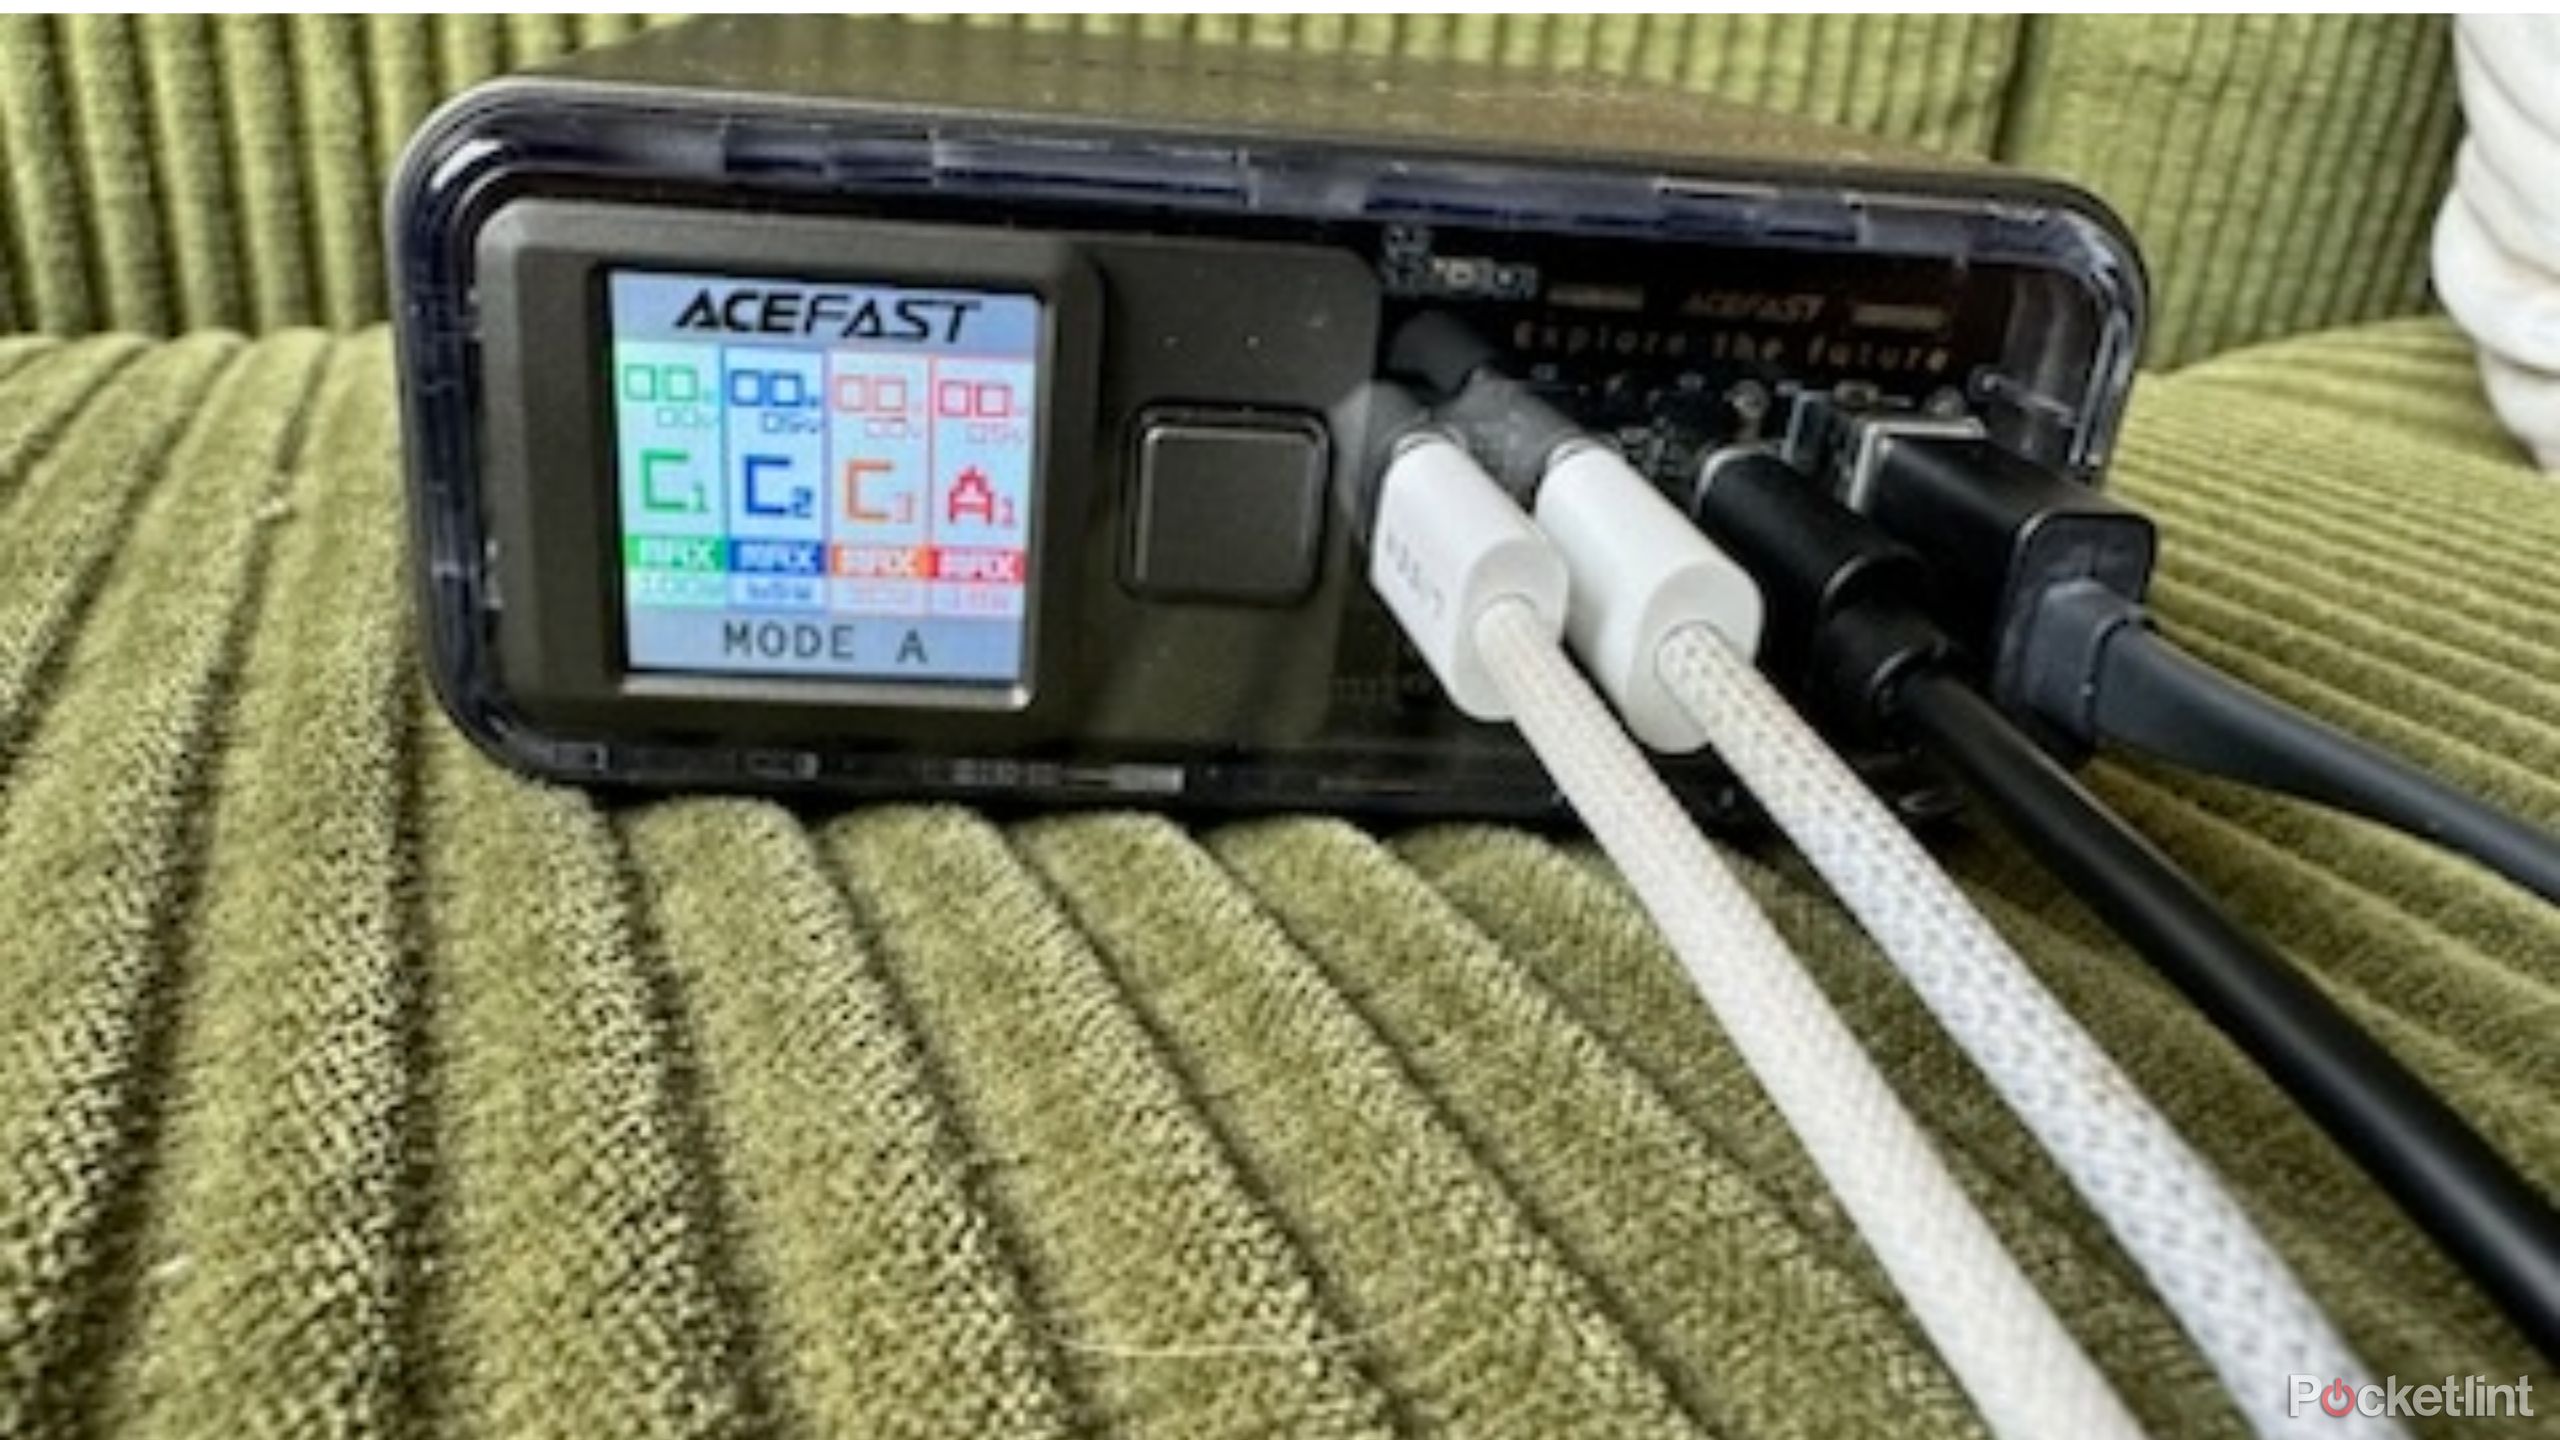 An image of the Acefast Z4 218W power station.